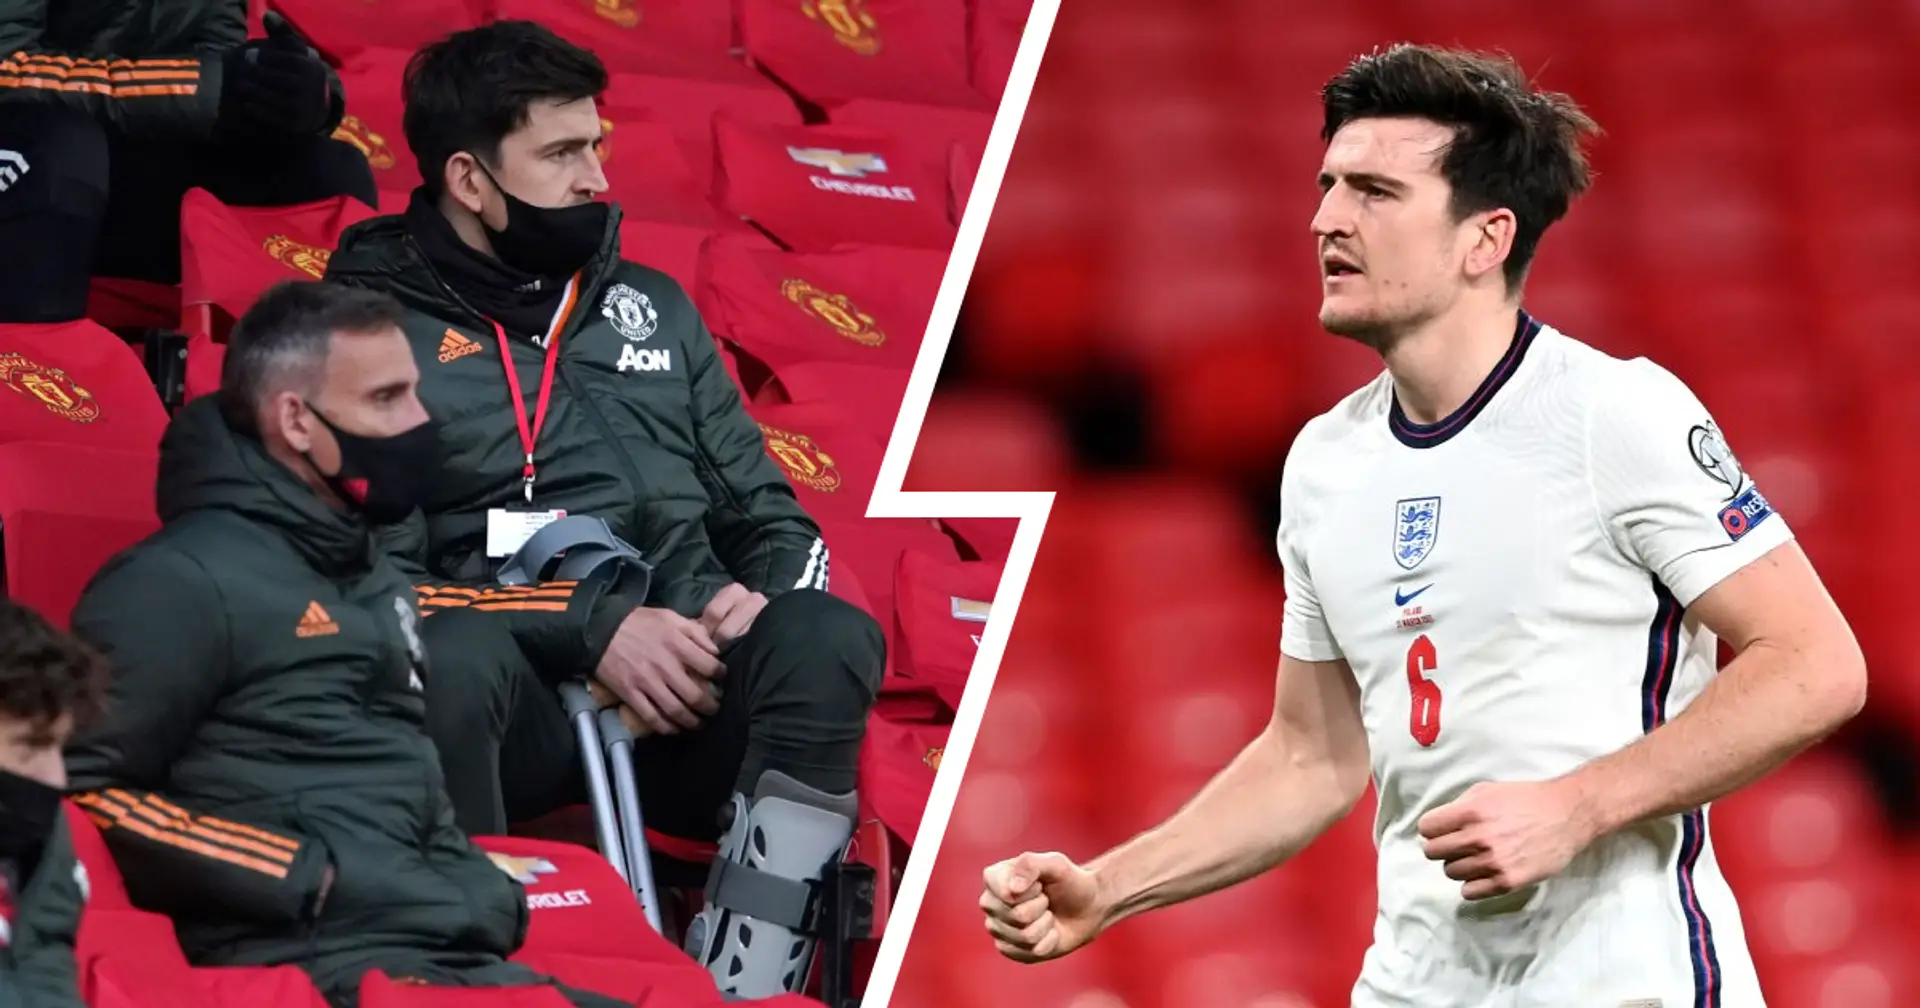 Mirror: Maguire won't be ready for Euro 2020 opener against Croatia